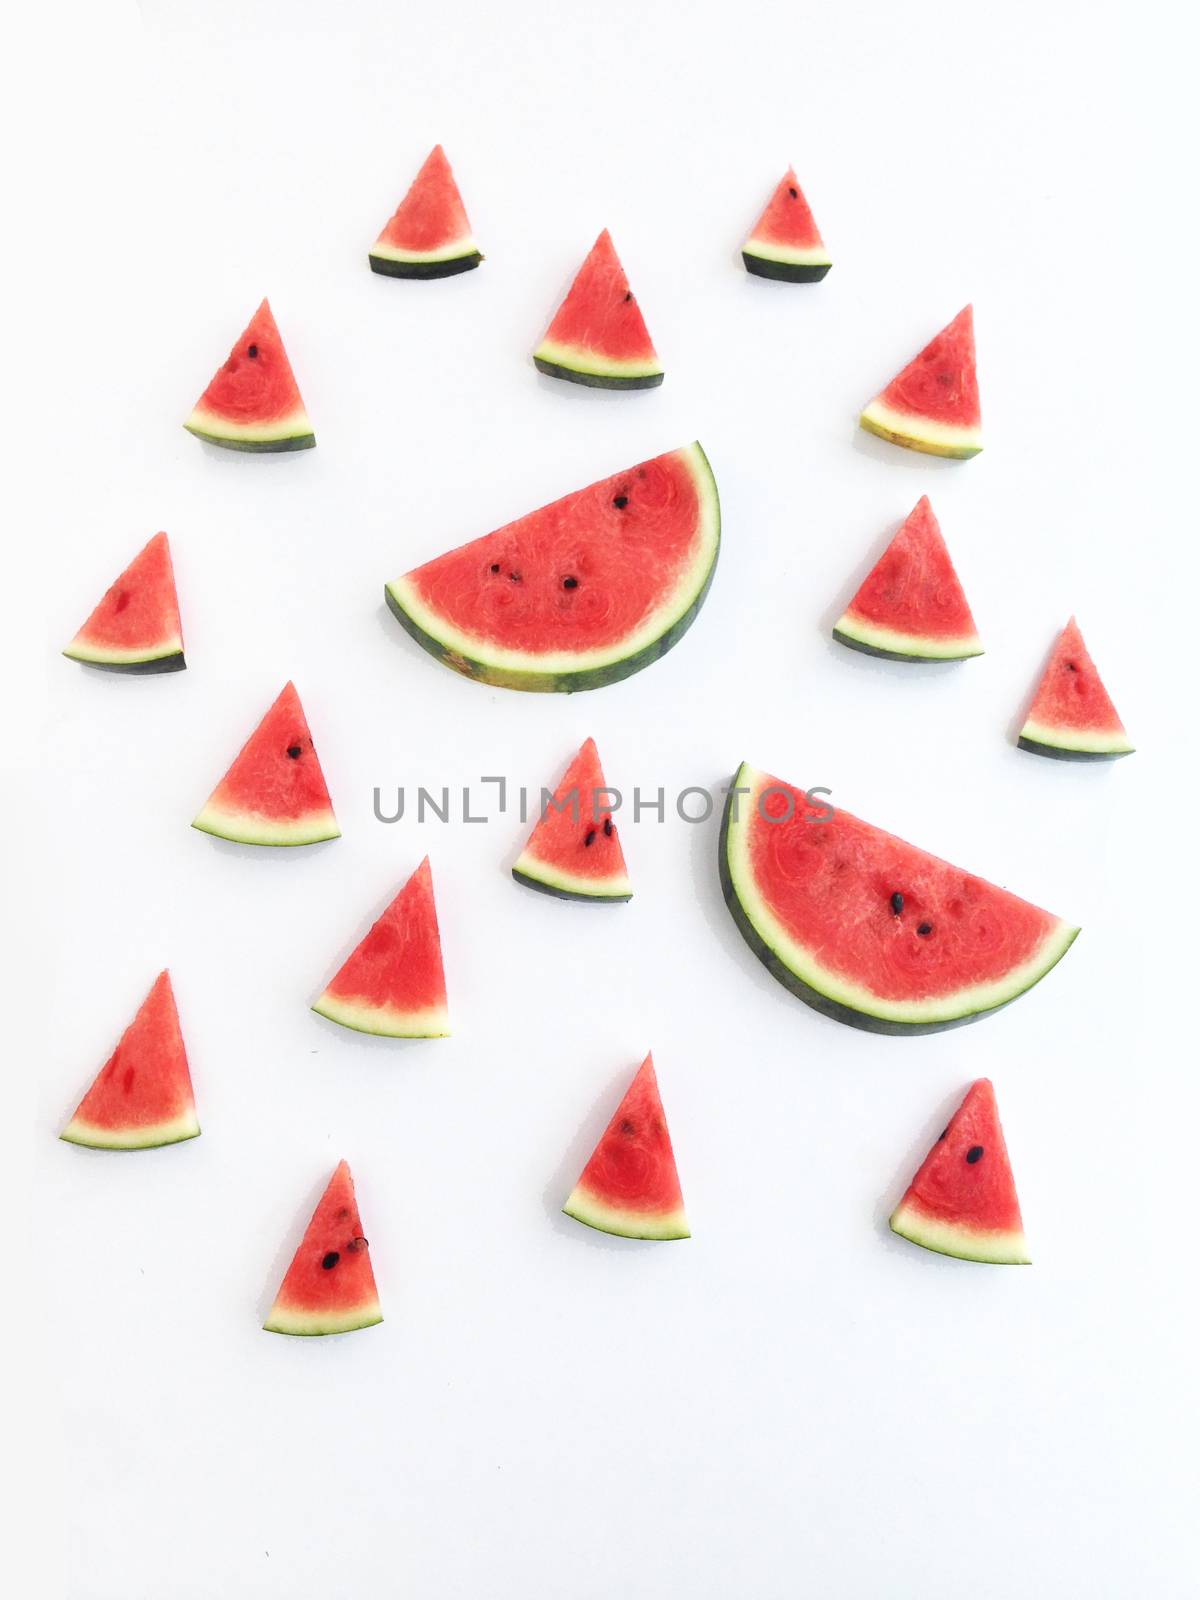 slices of watermelon on white background by Bowonpat